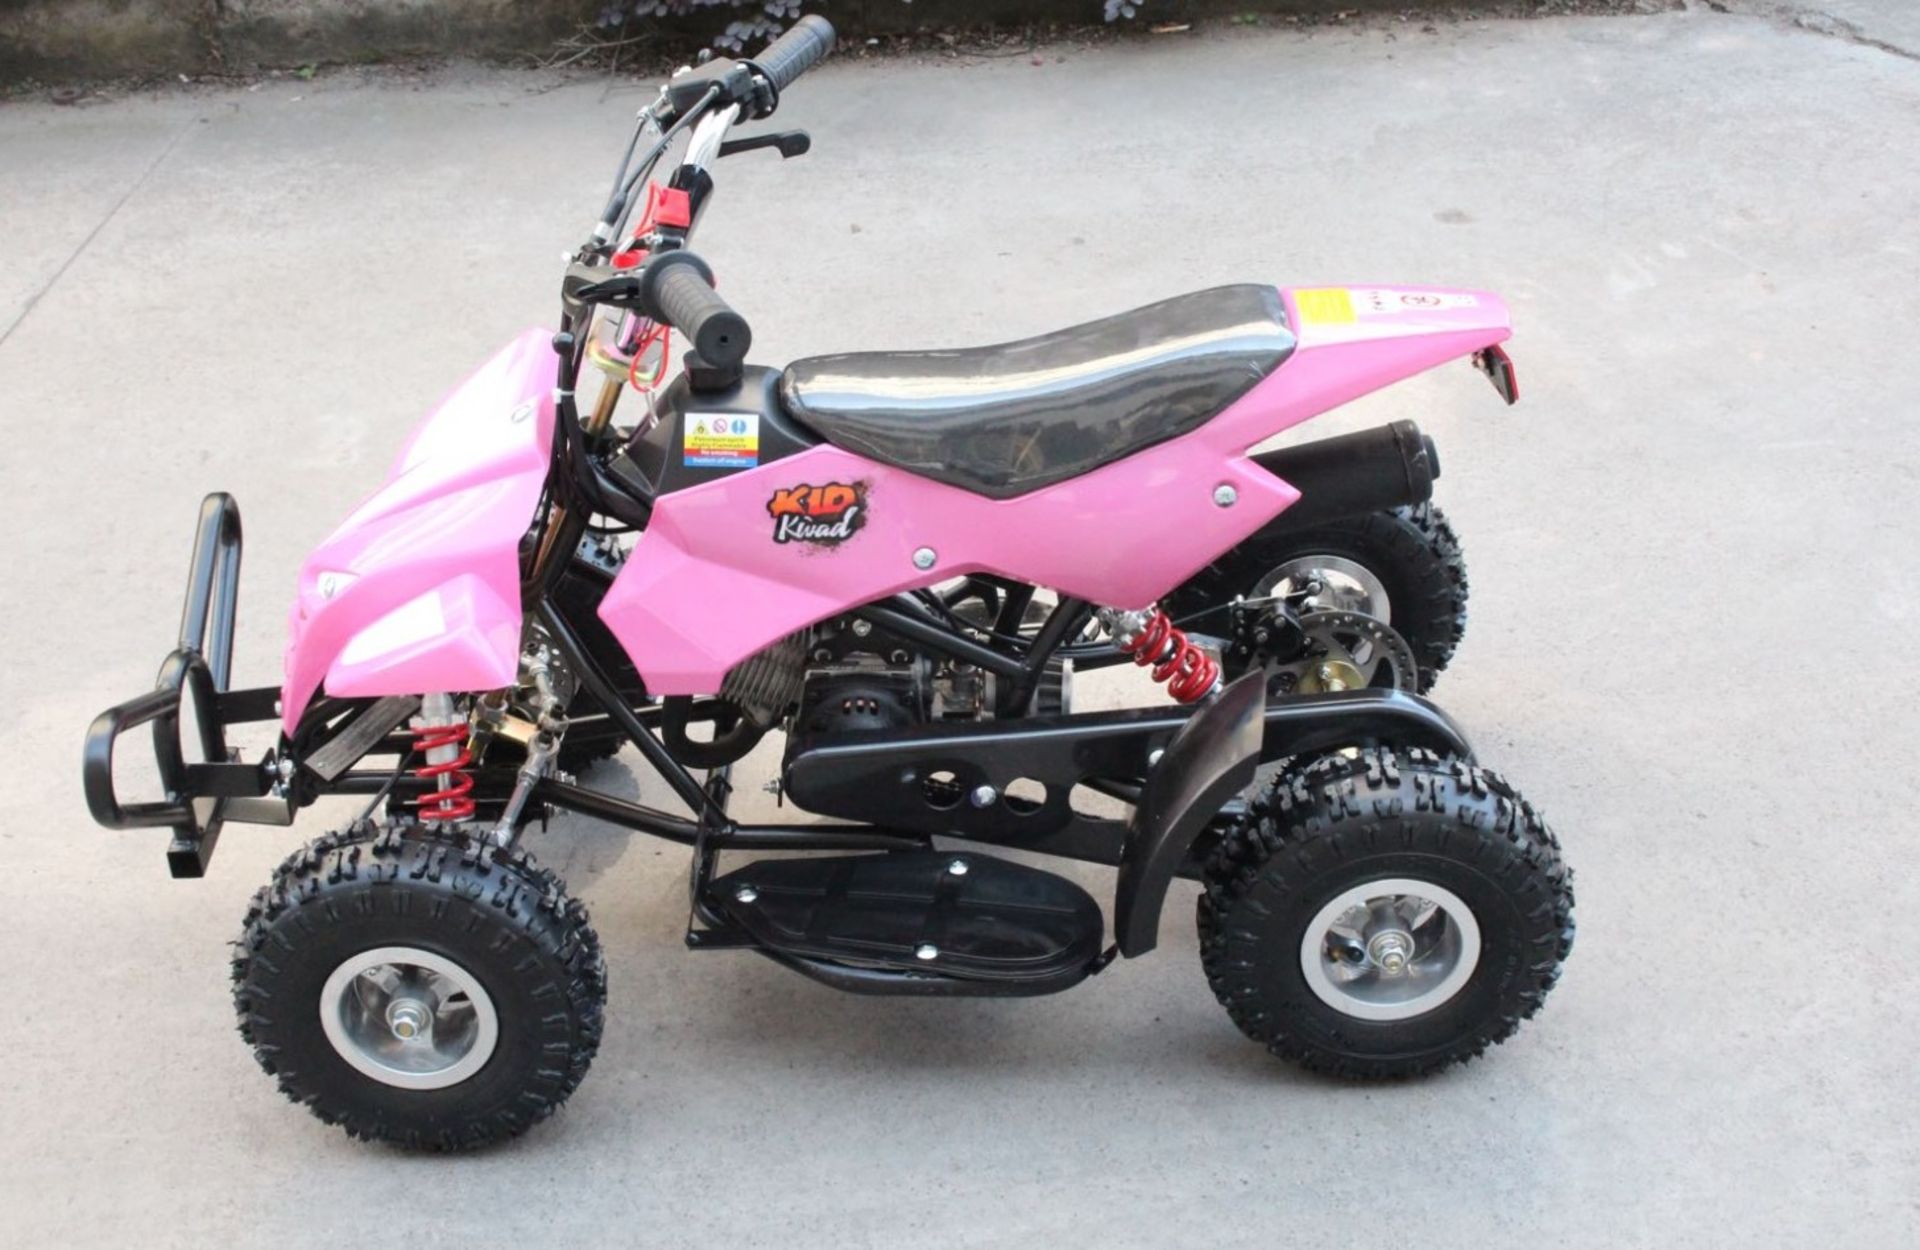 + VAT Brand New 50cc Mini Quad Bike FRM - Colours May Vary - Picture May Vary From Actual Item - Bild 2 aus 9